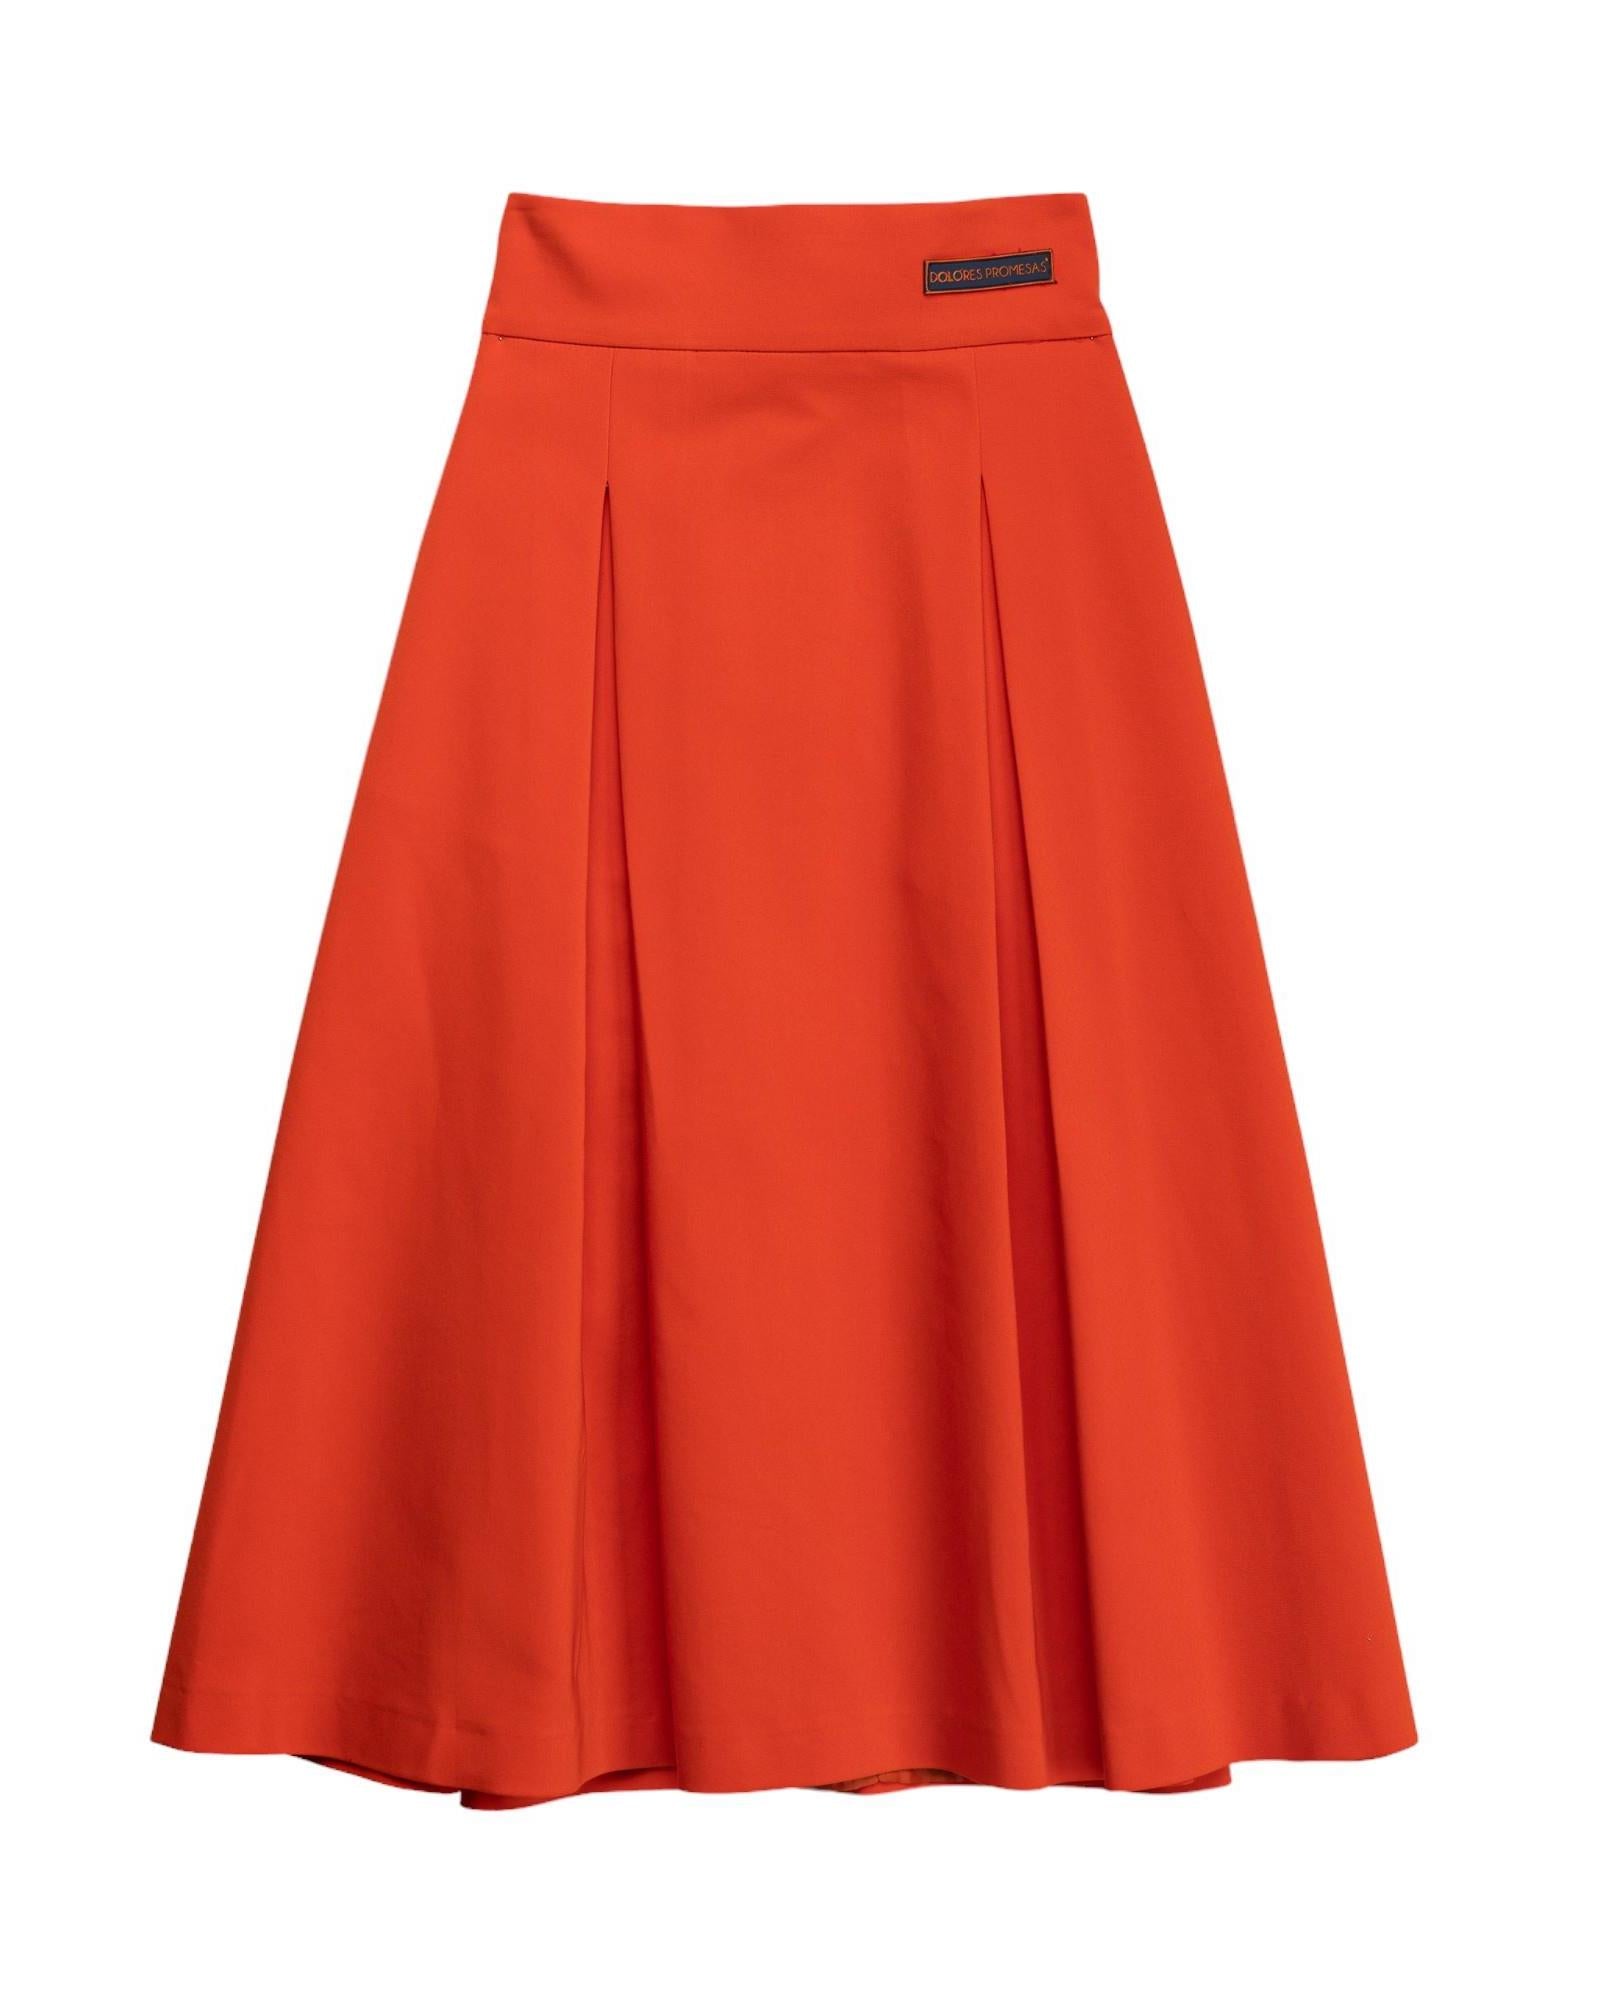 Dolores Promesas Women's Red Cotton Midi Skirt With Back Bow In Orange